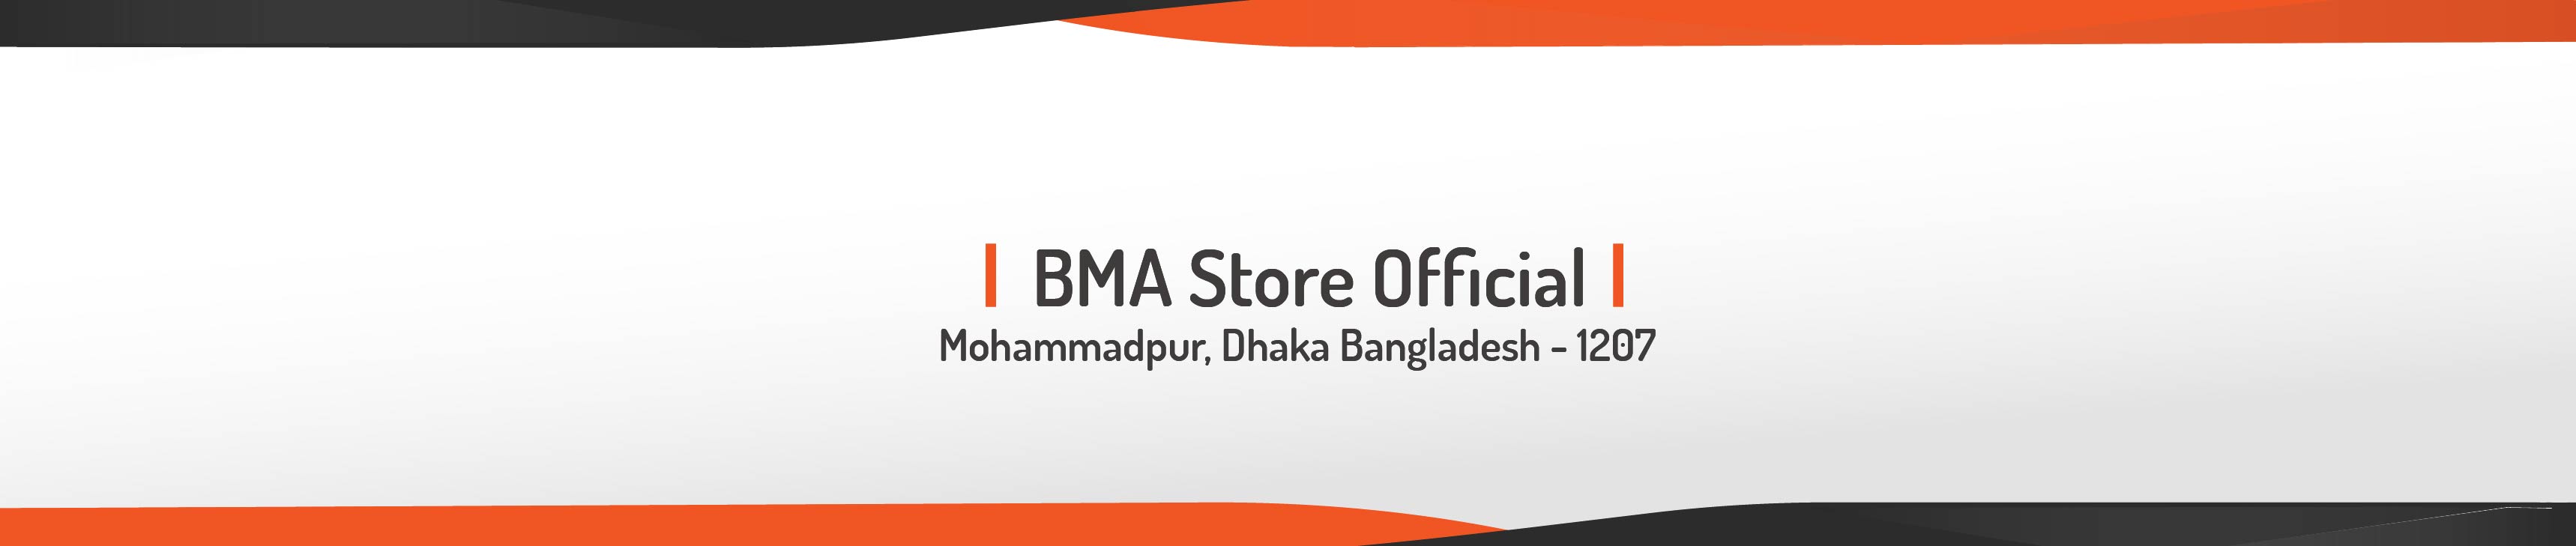 BMA Store Official